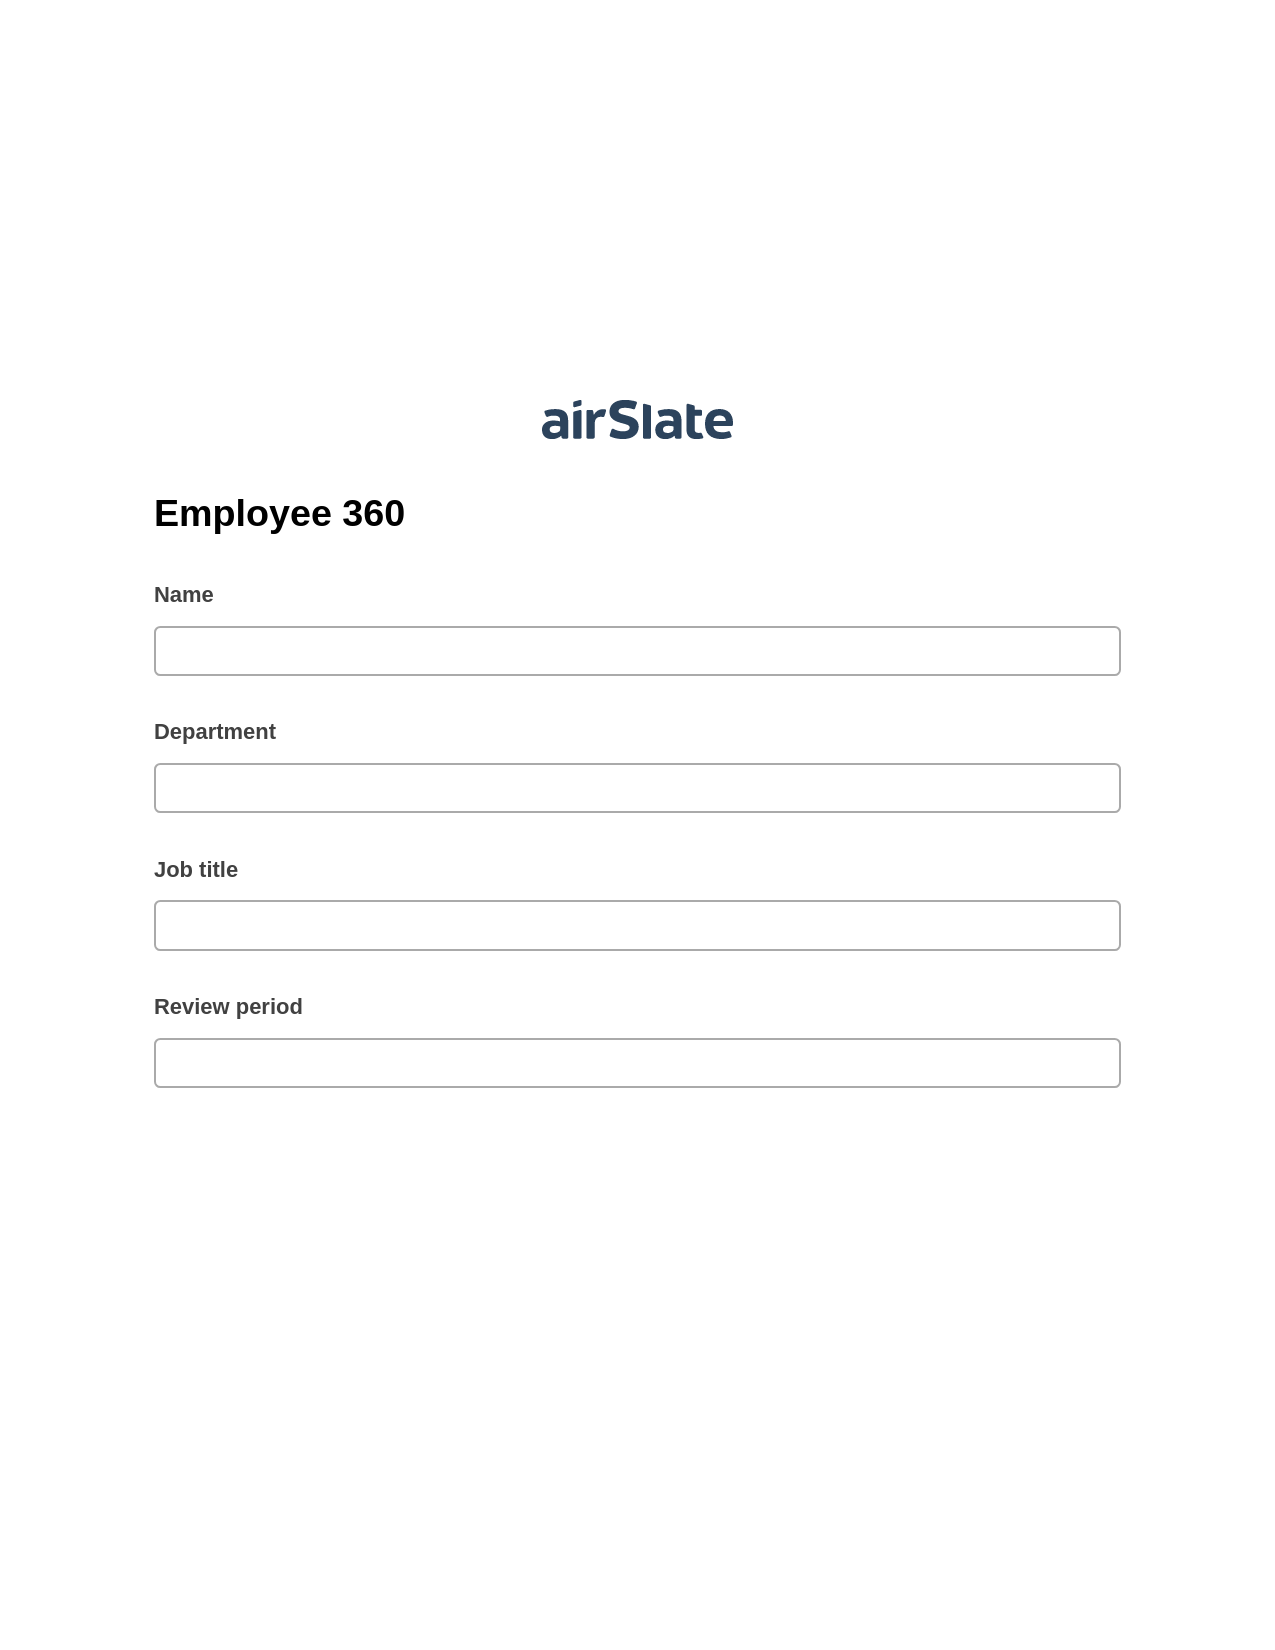 Multirole Employee 360 Pre-fill from MS Dynamics 365 Records, Export to MS Dynamics 365 Bot, Email Notification Postfinish Bot